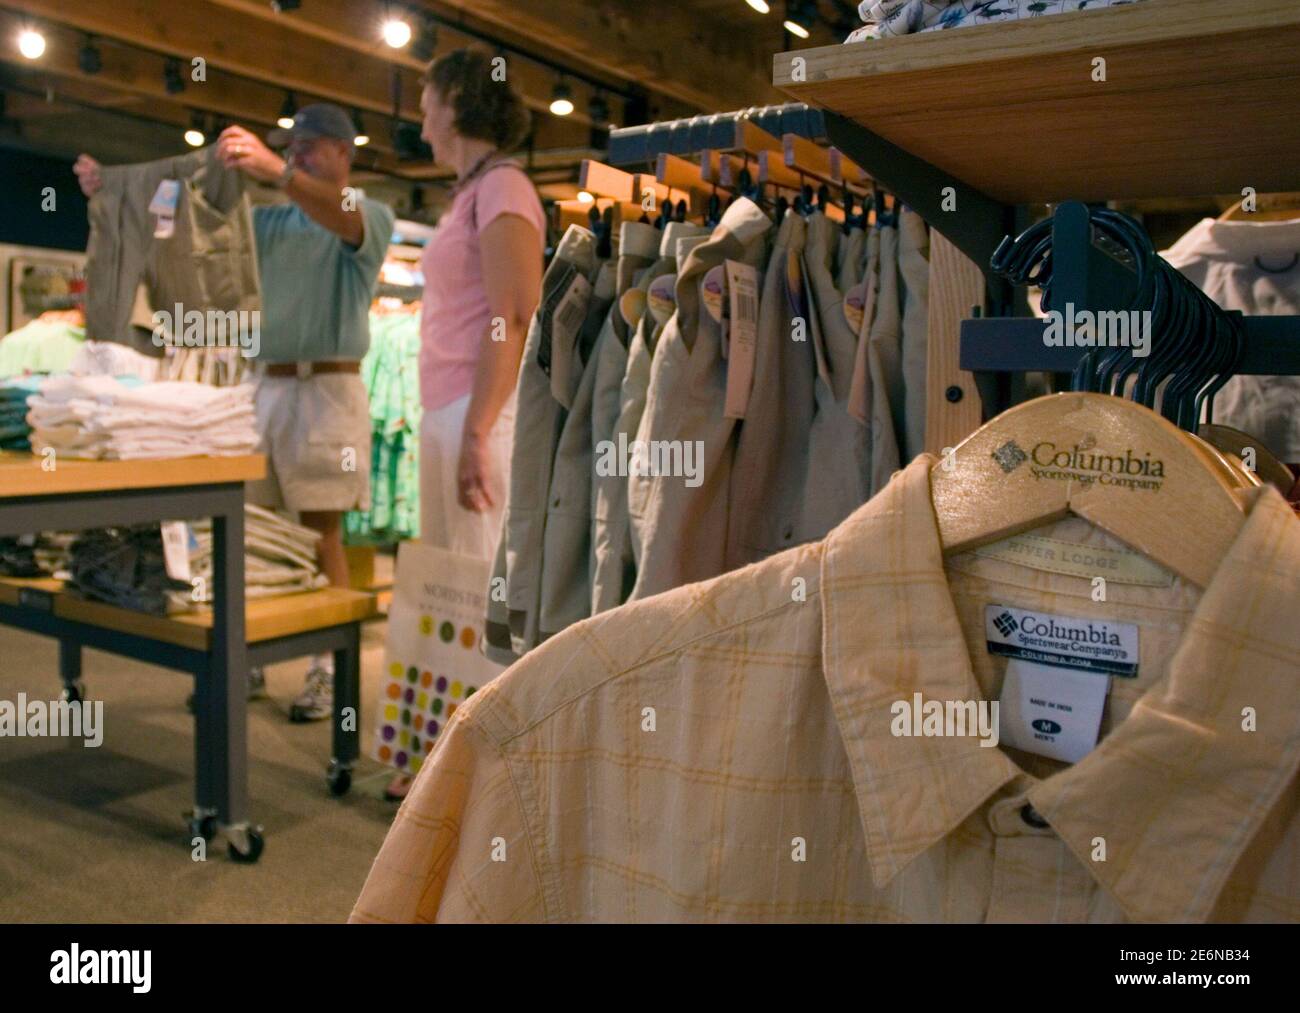 Customers shop at the Columbia Sportswear flagship store in Portland, Oregon,  July 27, 2006. Columbia Sportswear Co. on Thursday reported a 24 percent  decline in quarterly net income due to costs for